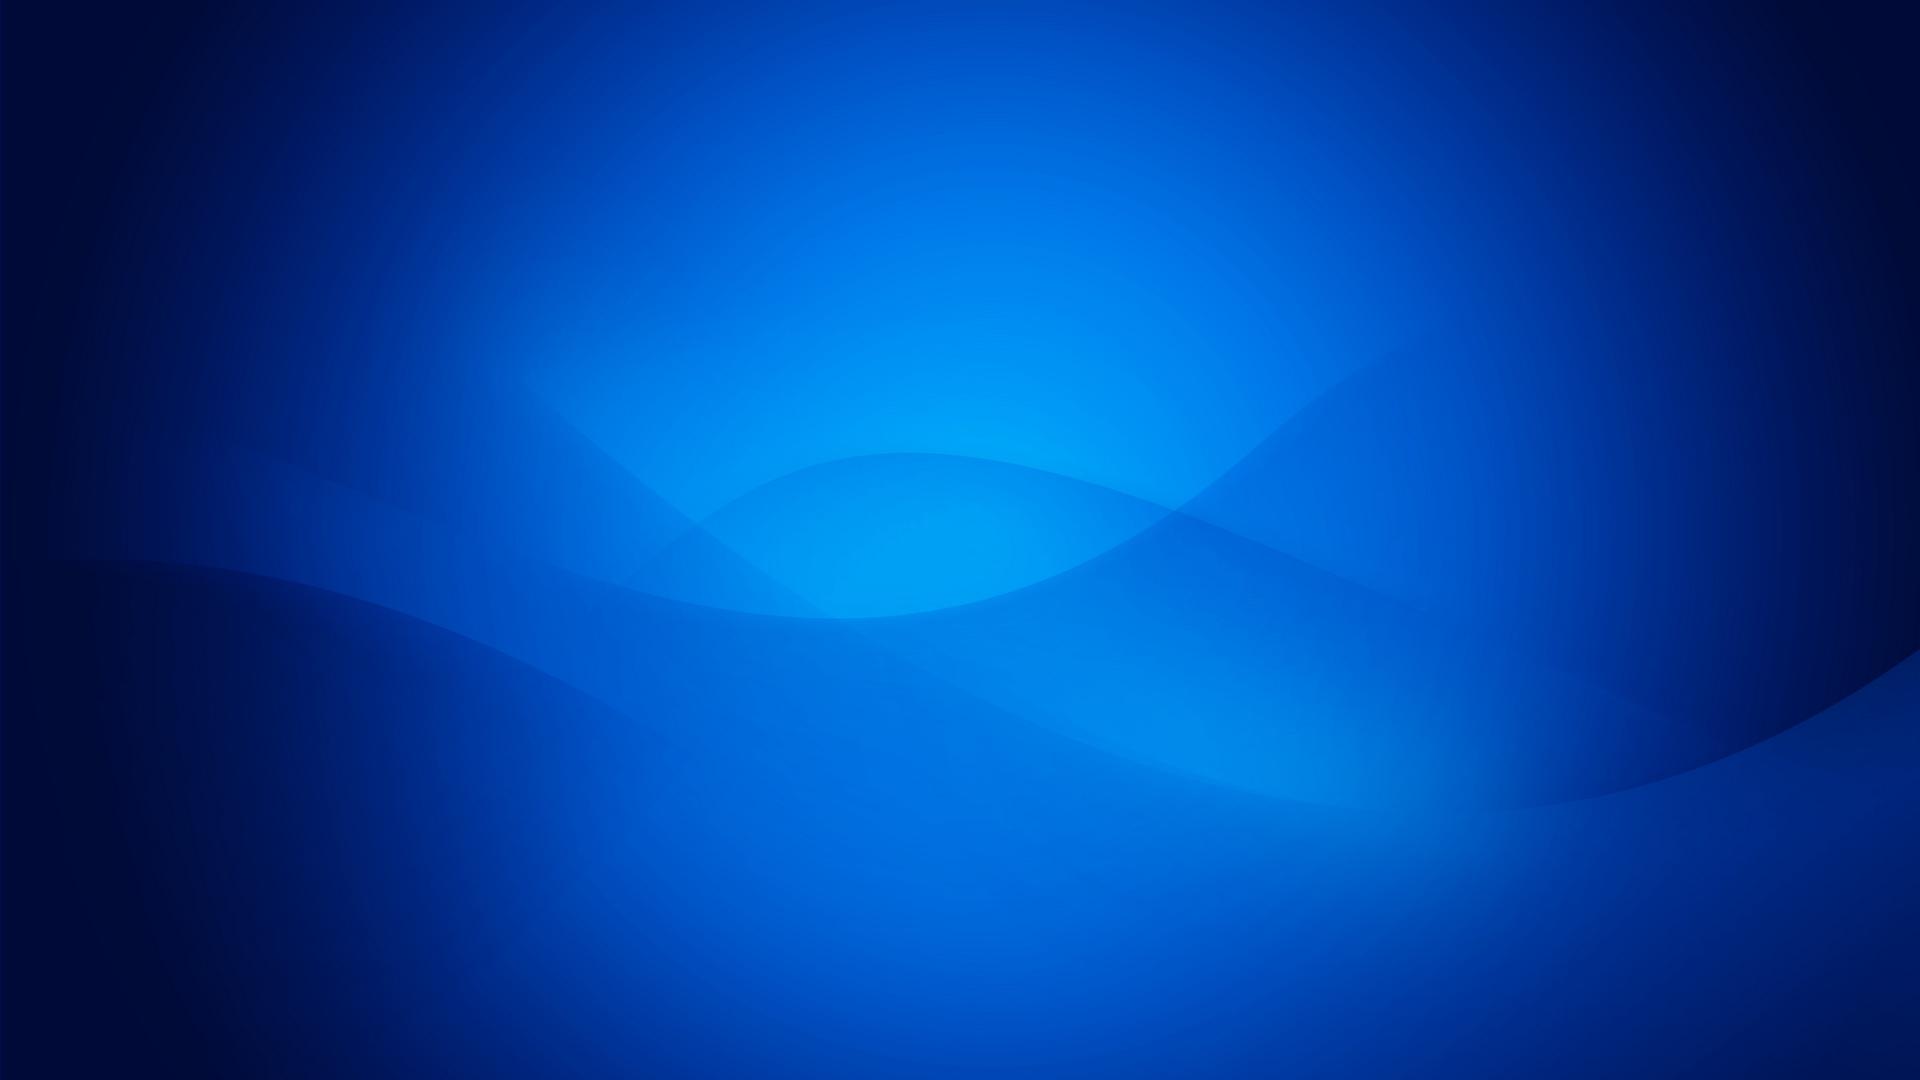 HD Blue Wallpaper Background For